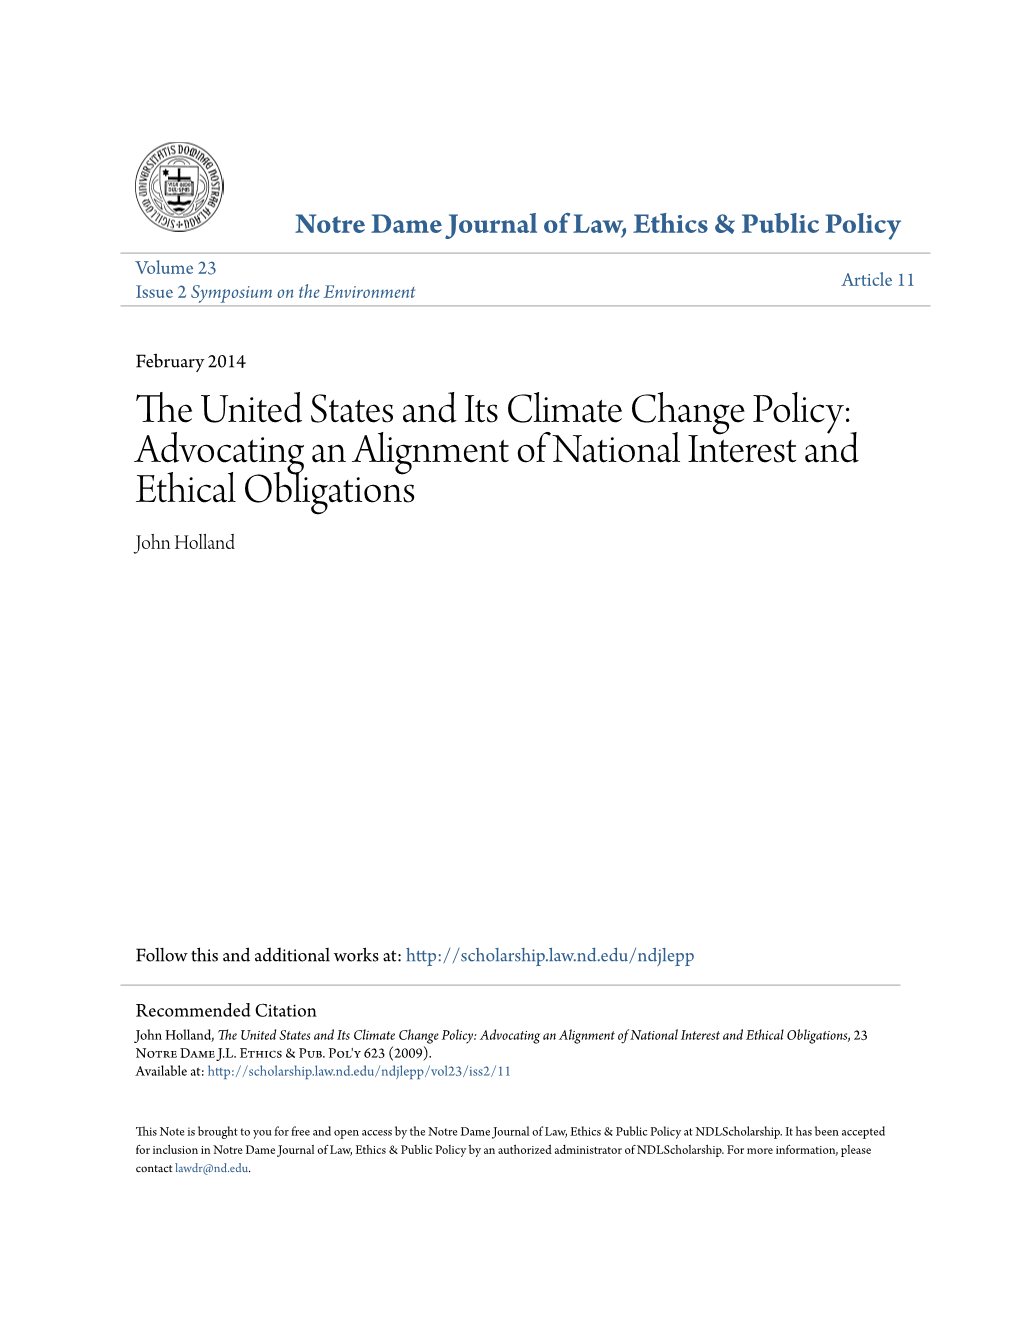 The United States and Its Climate Change Policy: Advocating an Alignment of National Interest and Ethical Obligations, 23 Notre Dame J.L